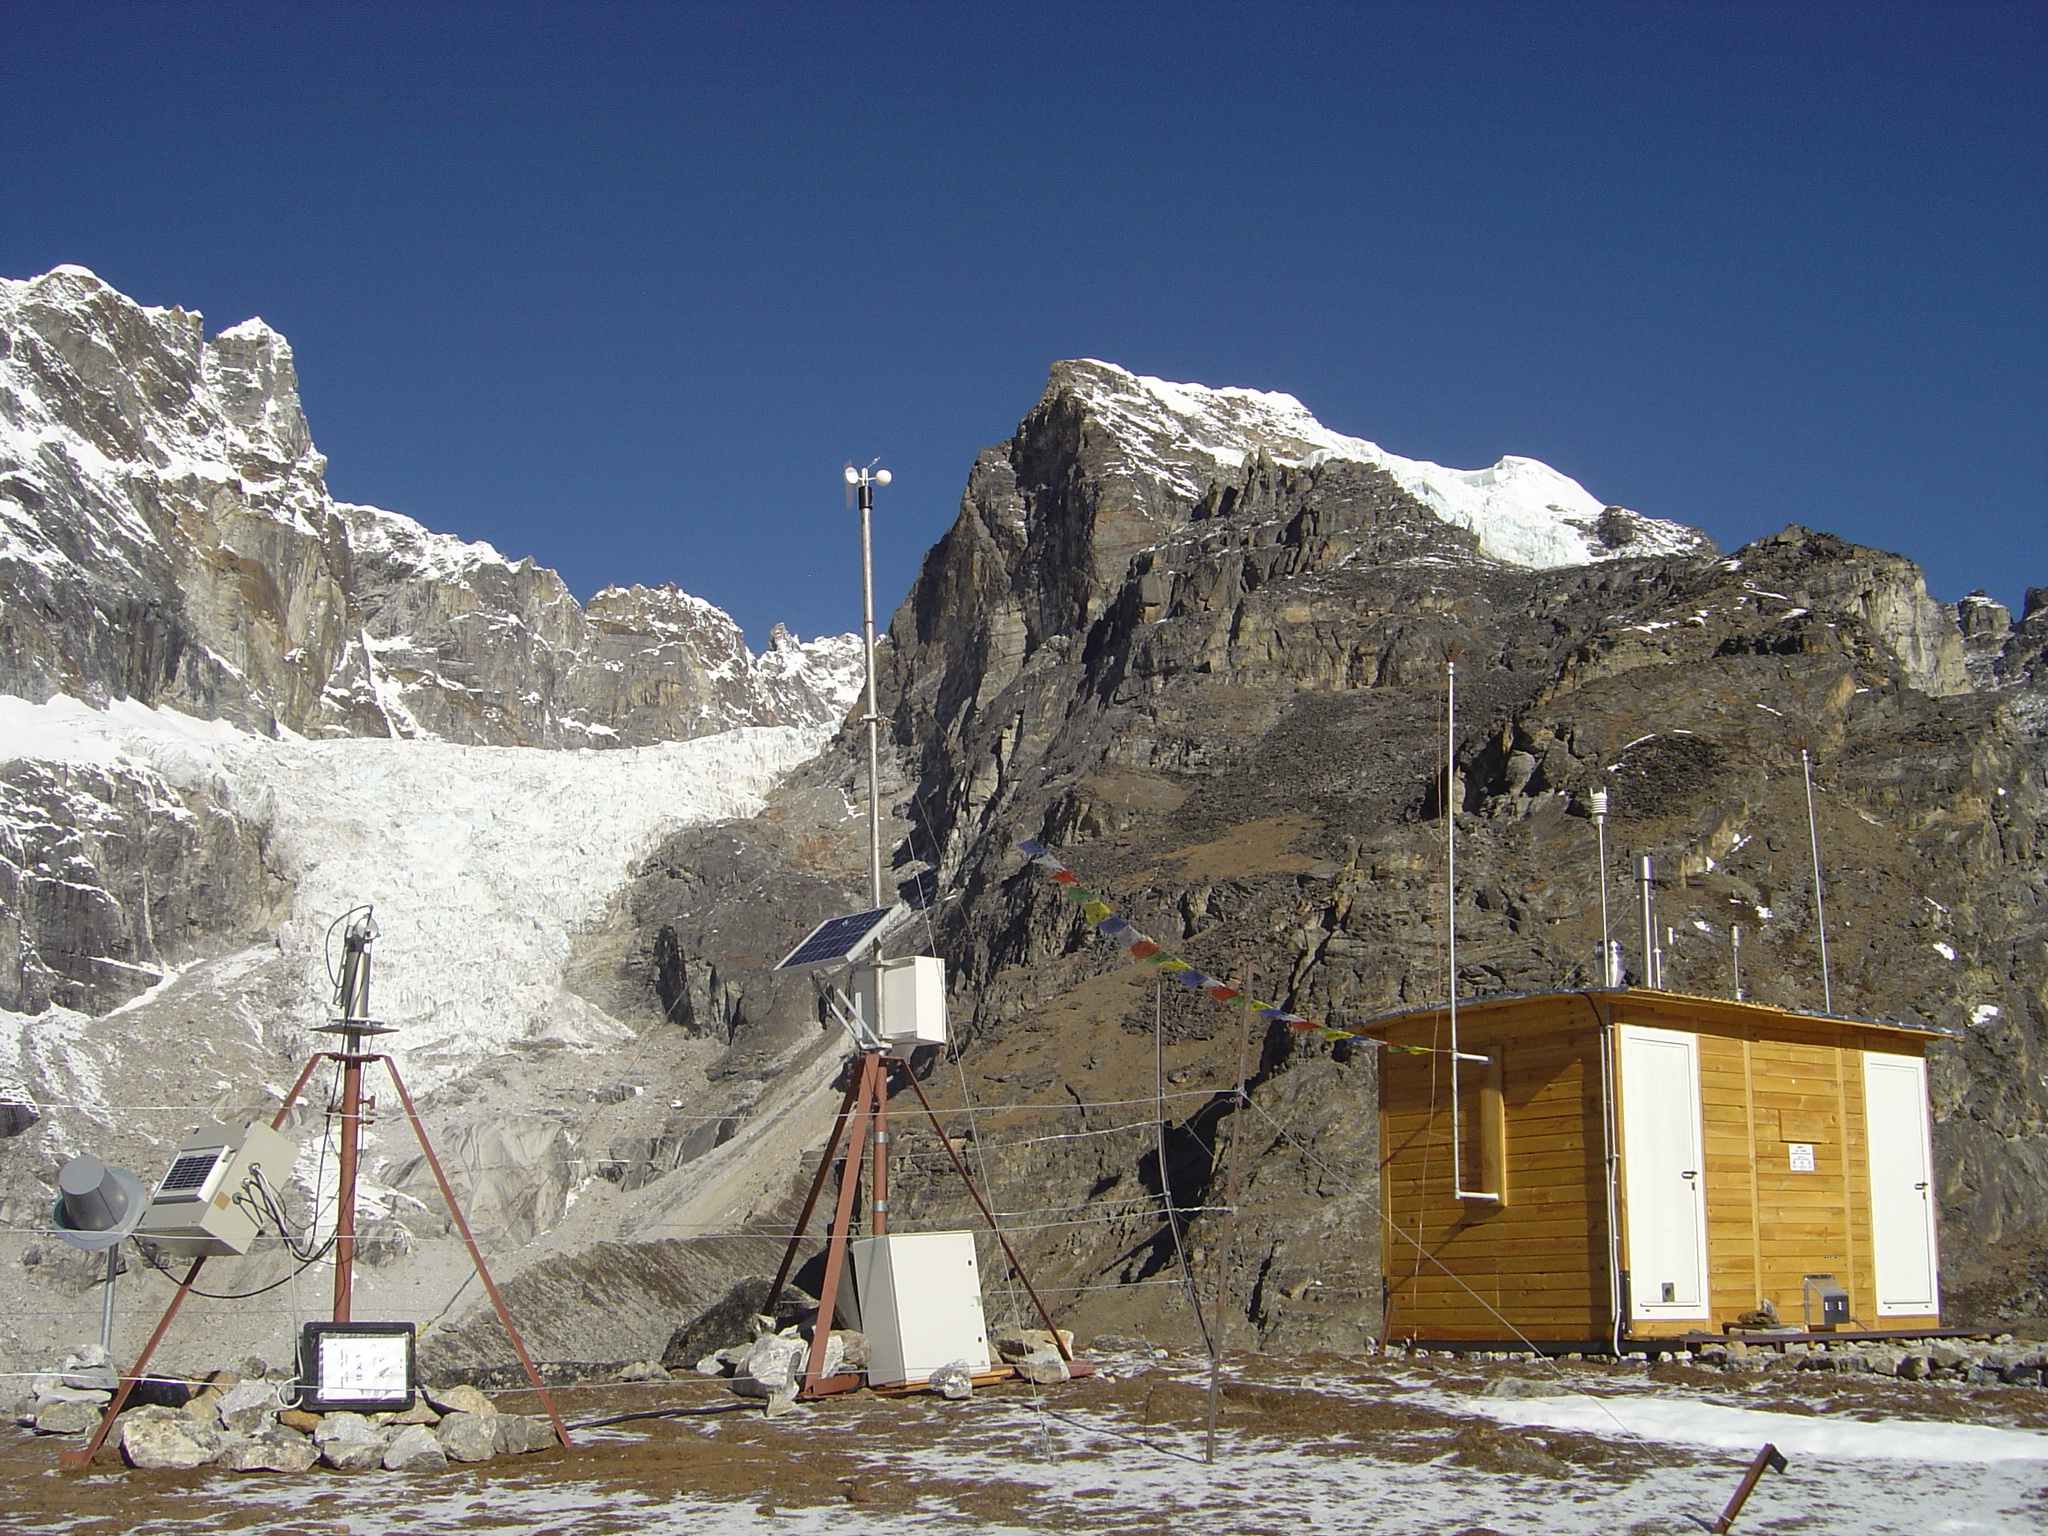 A monitoring station at the Pyramid Observatory on Mount Everest.